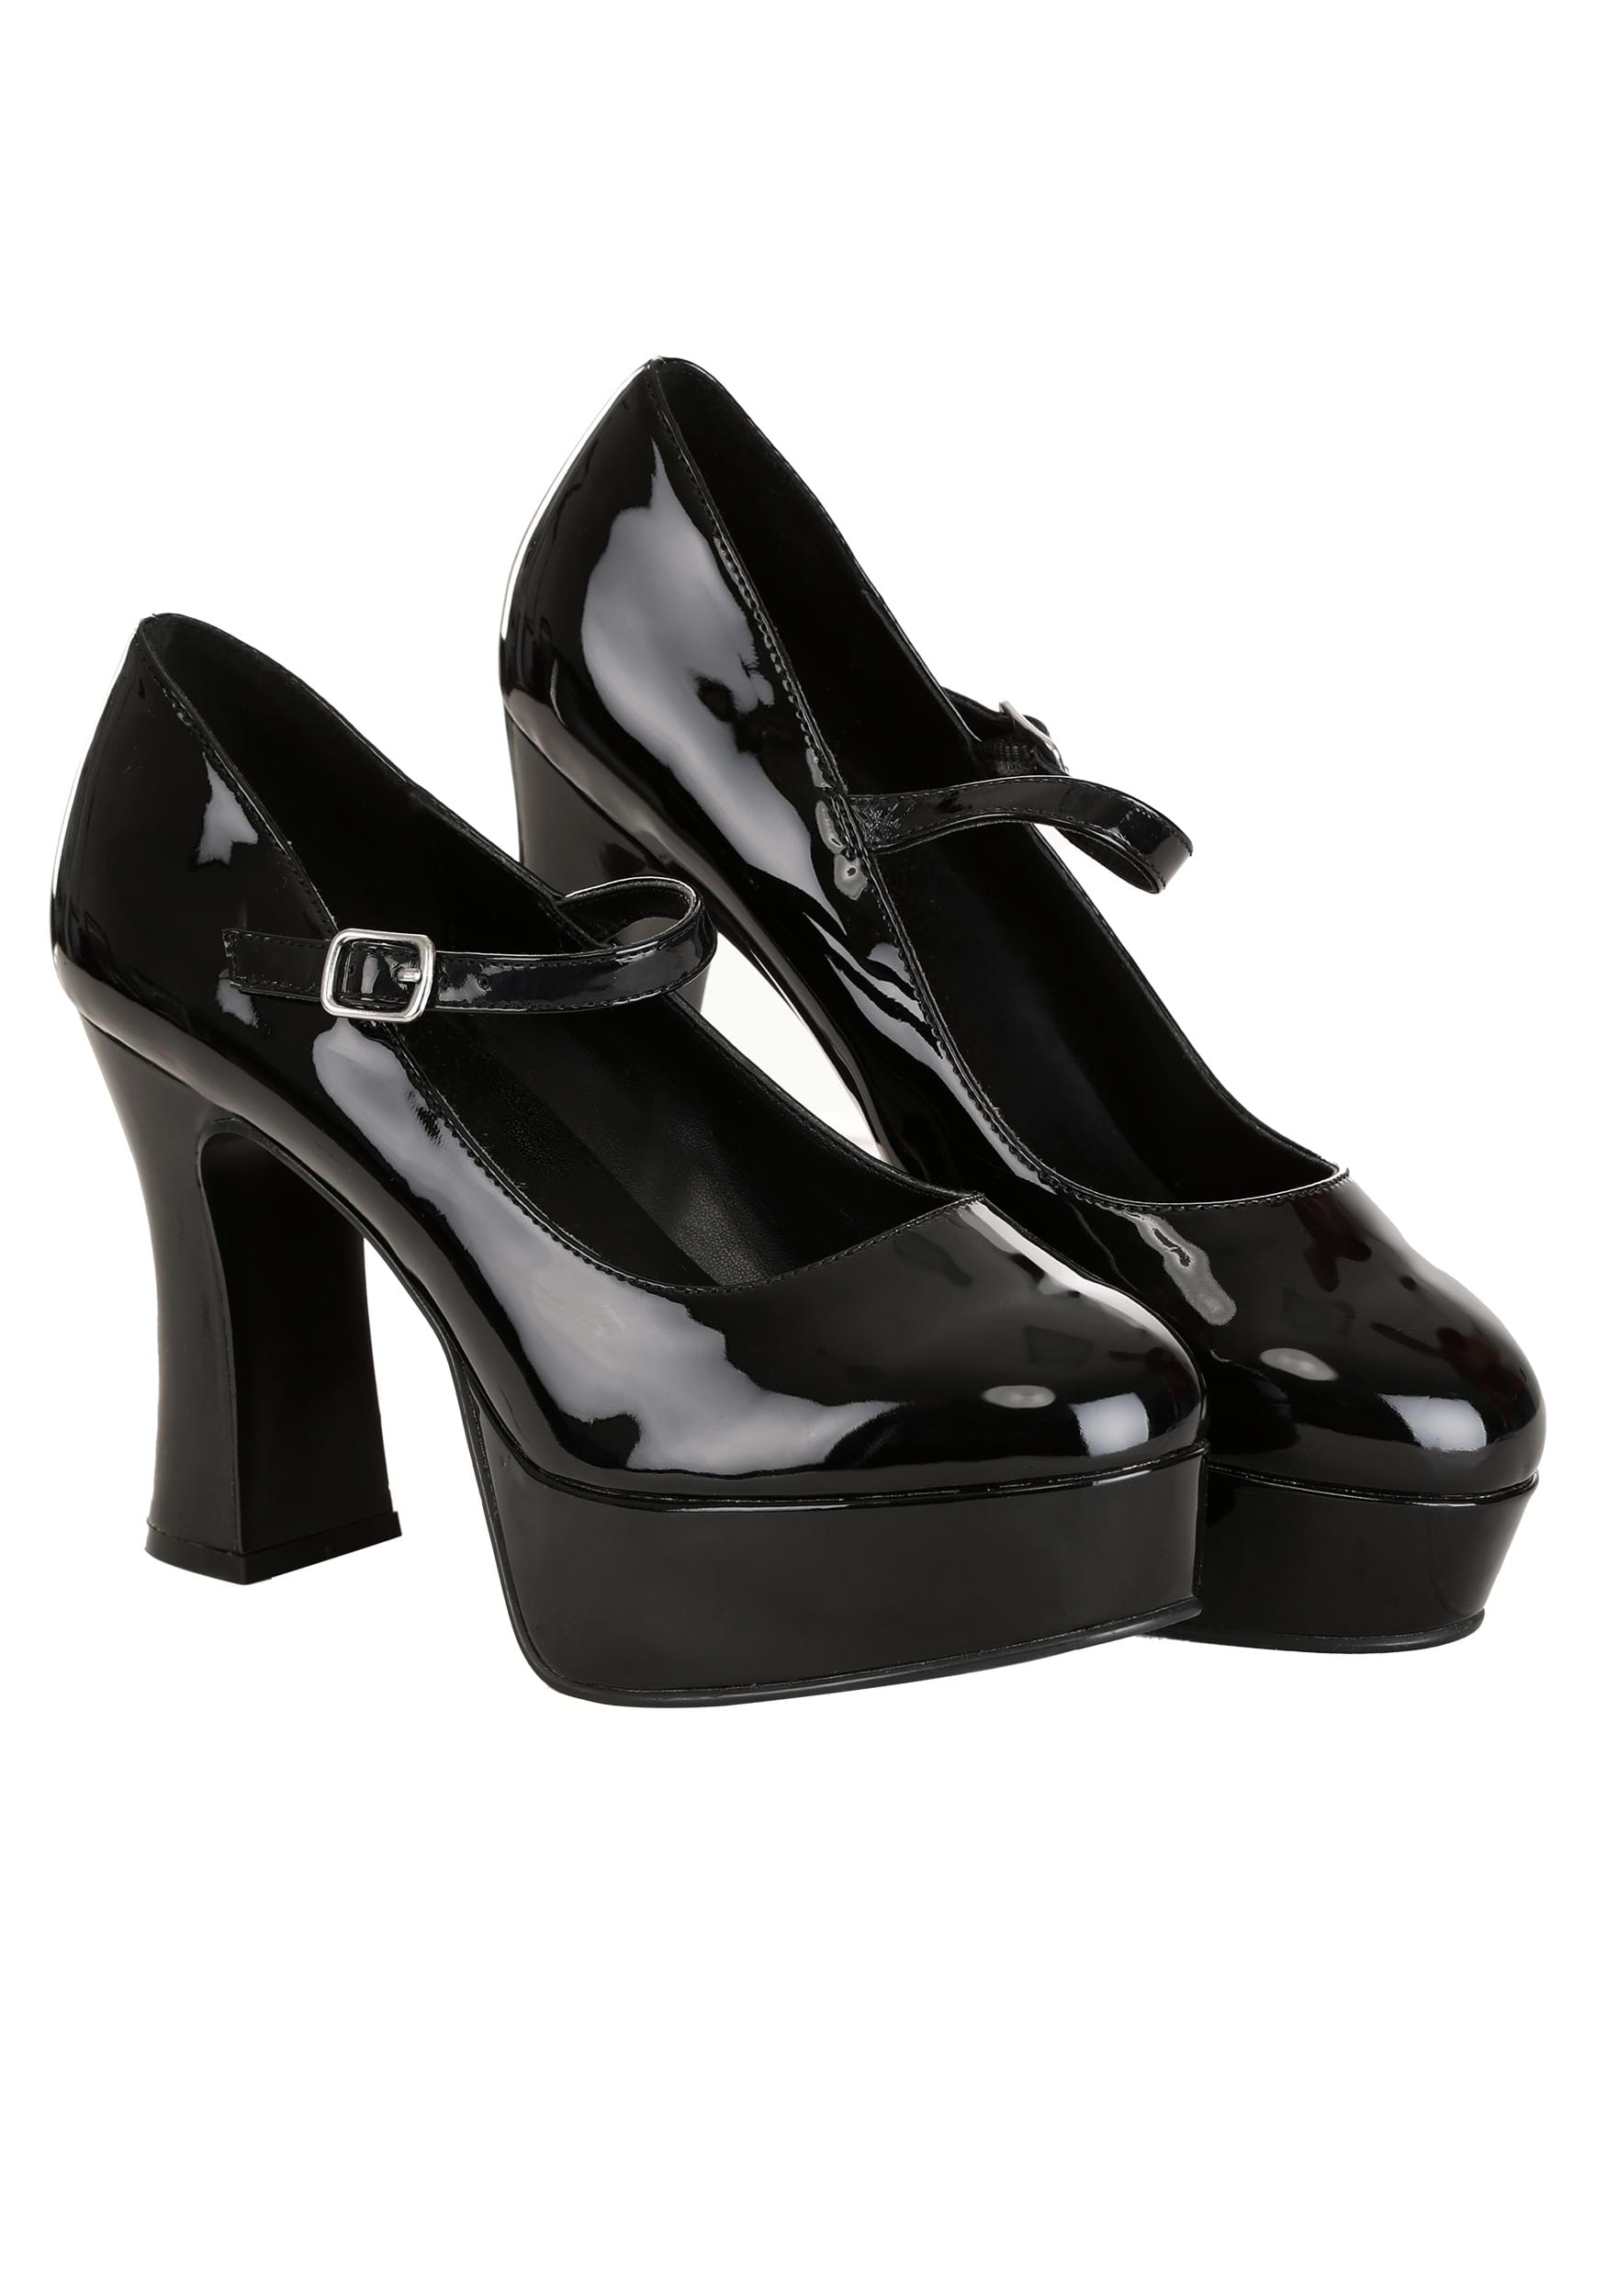 Patent Faux Leather Mary Jane Shoes for Women